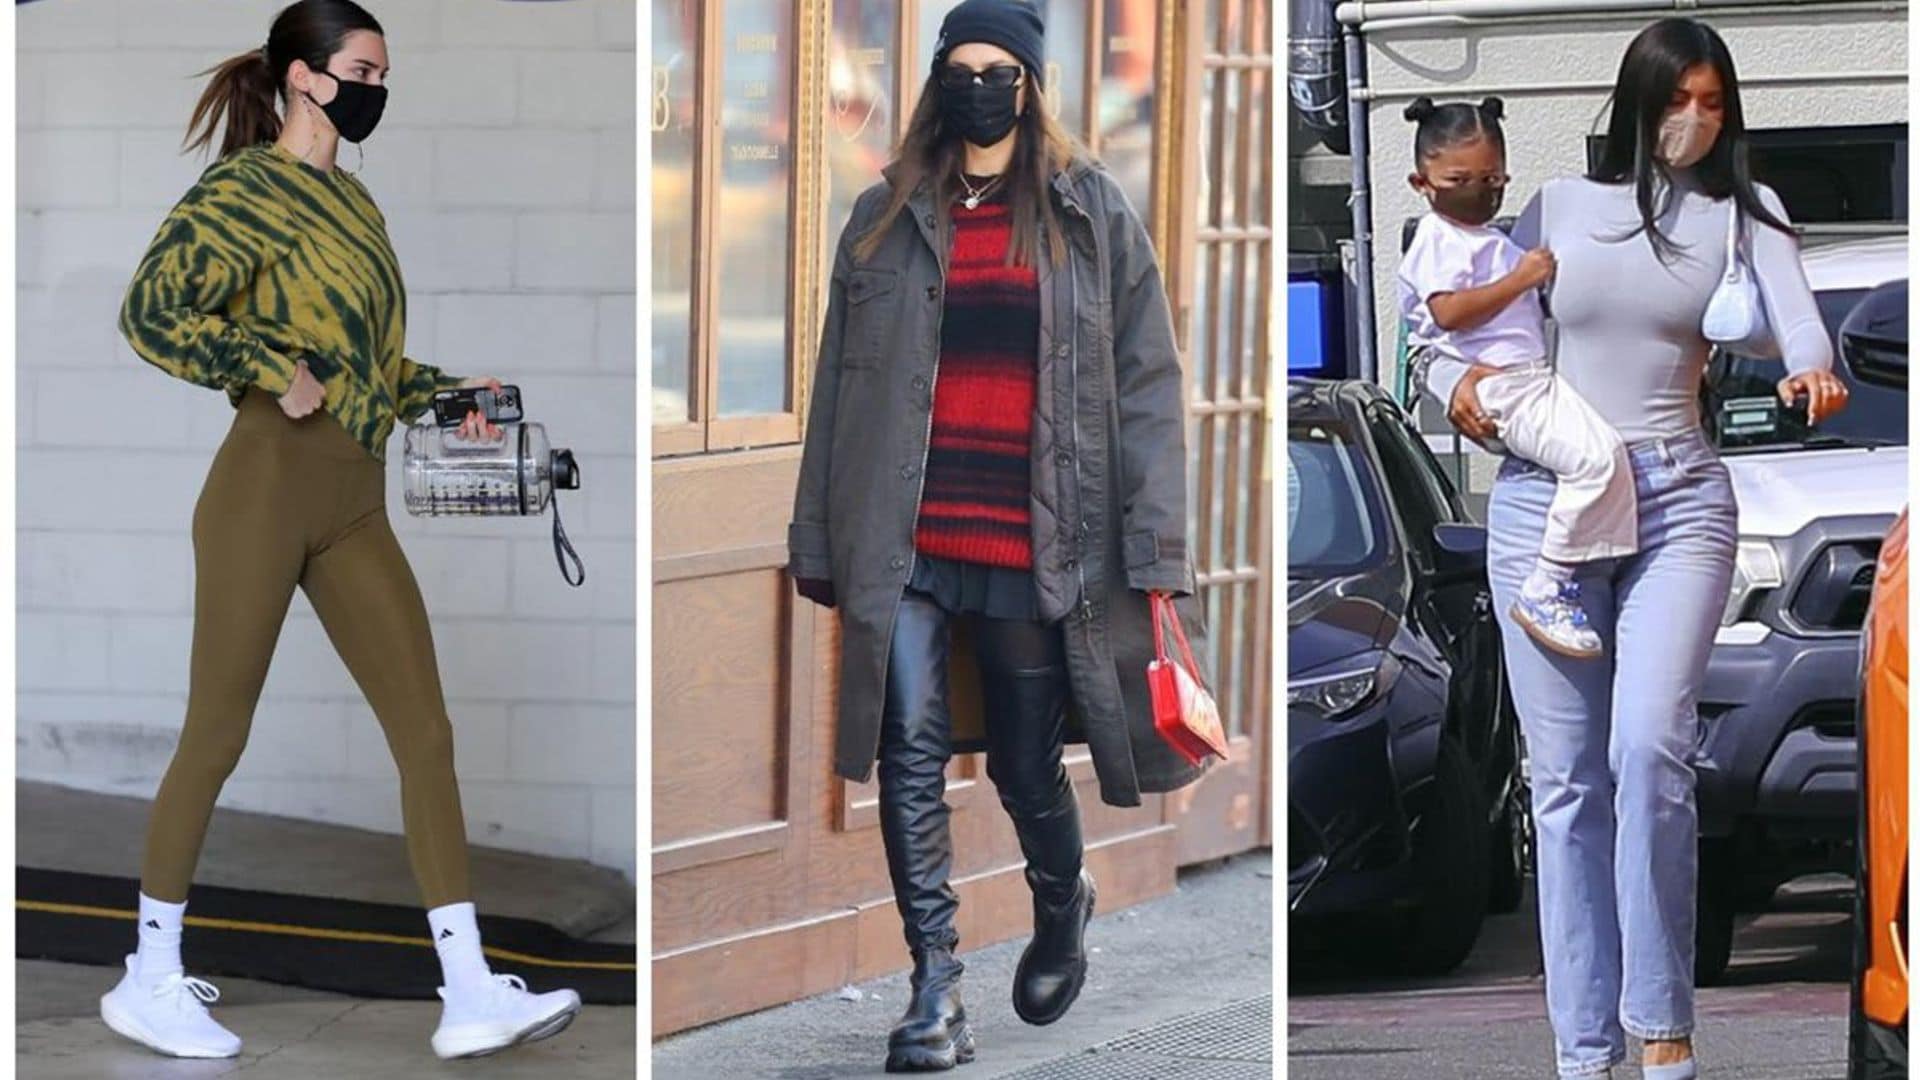 The top 10 celebrity style looks of the week - March 8